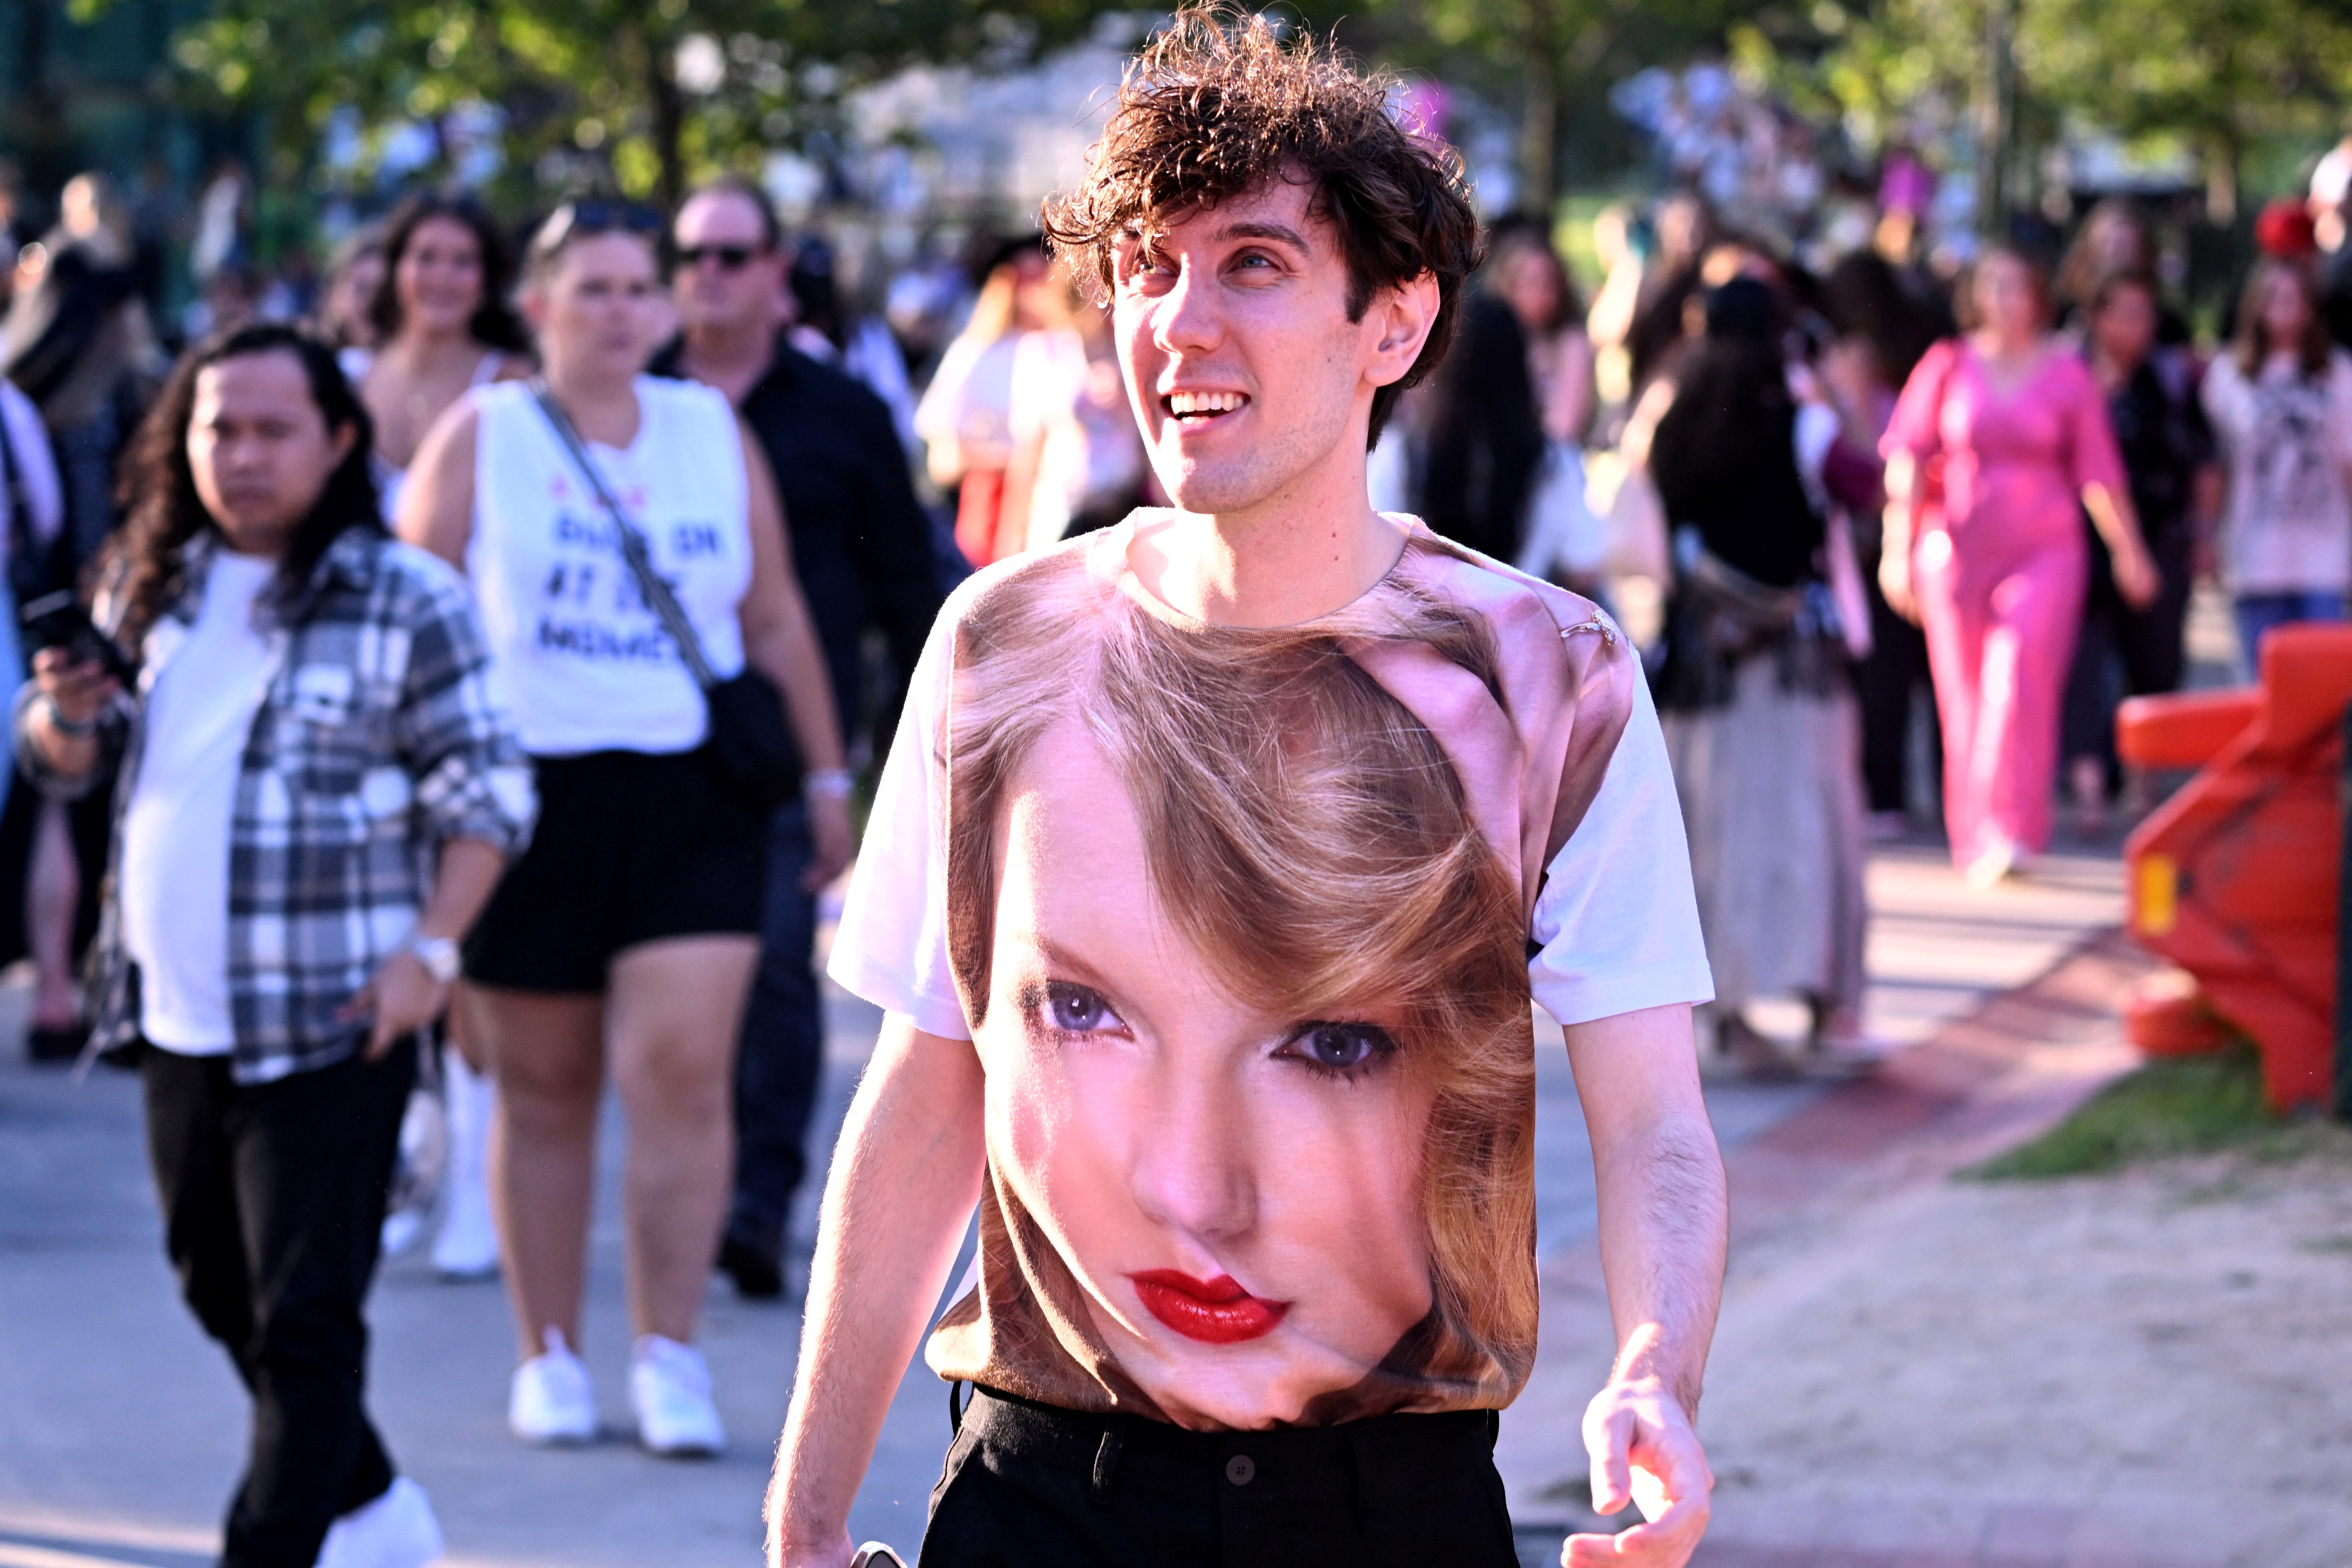 Taylor Swift superfans are encouraged to apply for the role